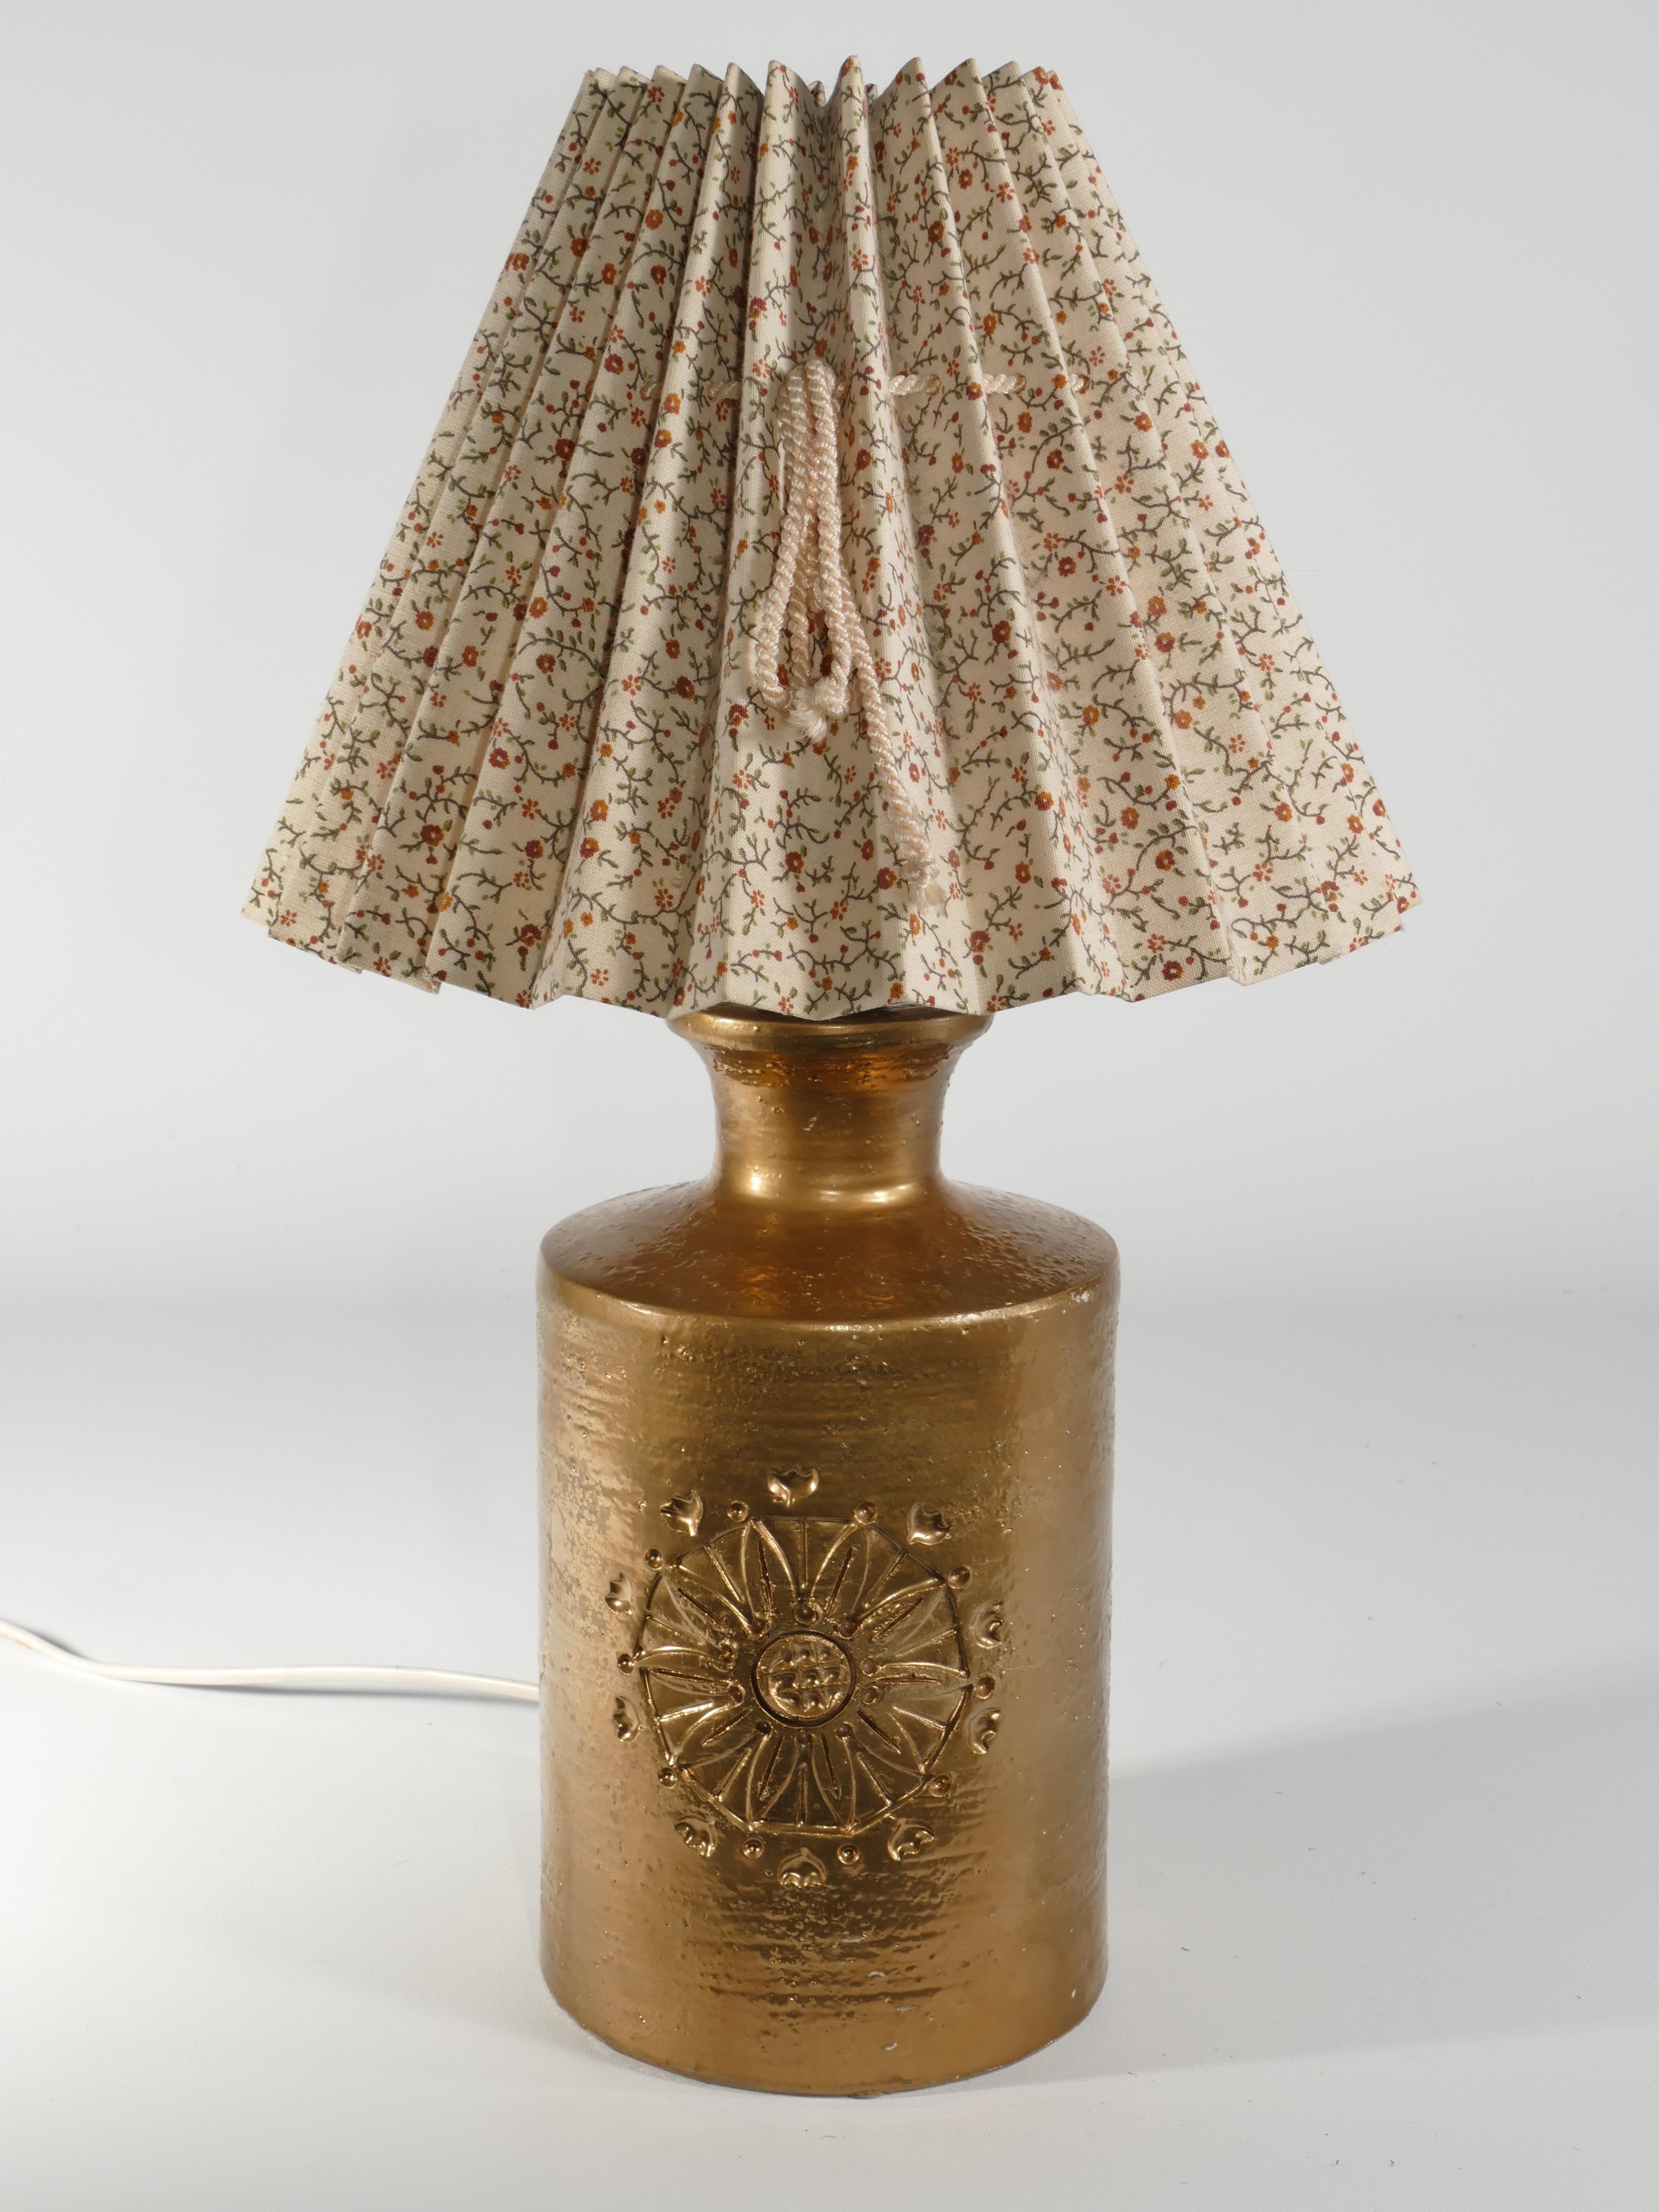 Gold Glazed Ceramic Table Lamp by Bitossi for Bergboms, 1970's In Good Condition For Sale In Grythyttan, SE